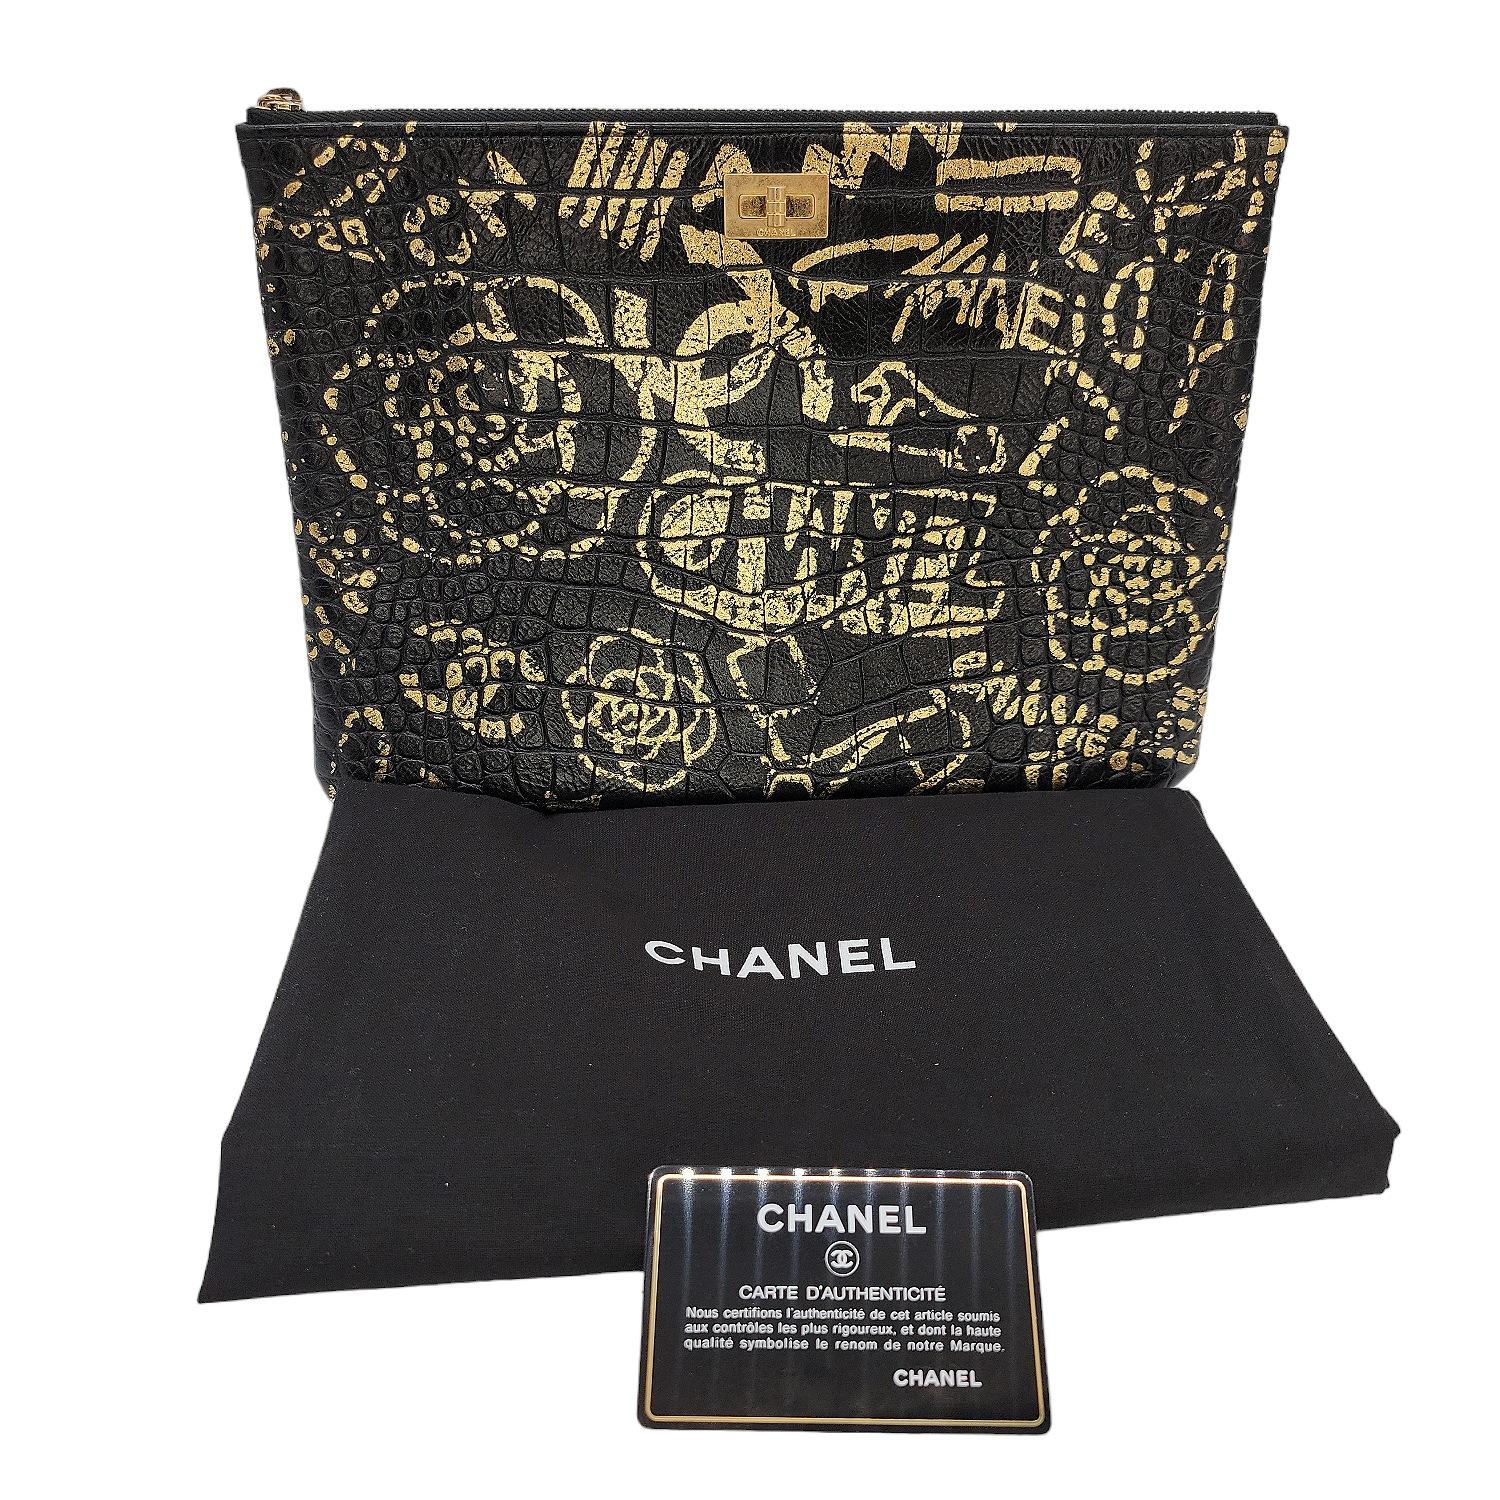 Chanel Black And Gold Croc-Embossed O-Case 2.55 Reissue For Sale 3